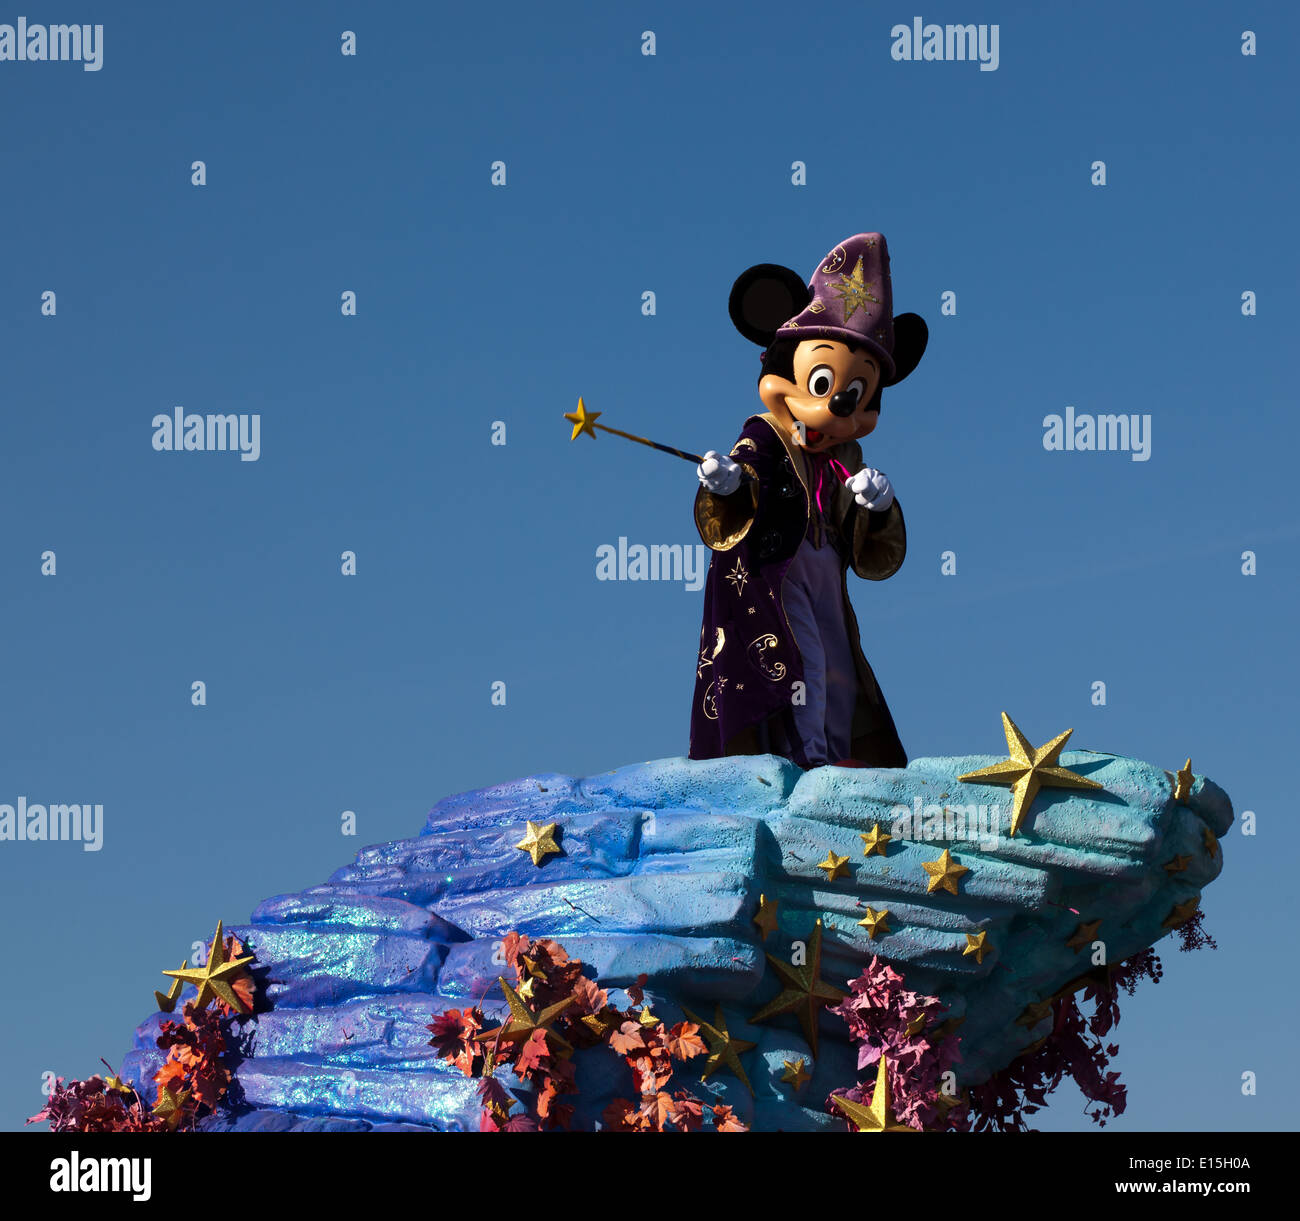 A Disney Parade with Micky Mouse dressed as  'The Sorcerer's Apprentice' from the Disney film Fantasia Stock Photo